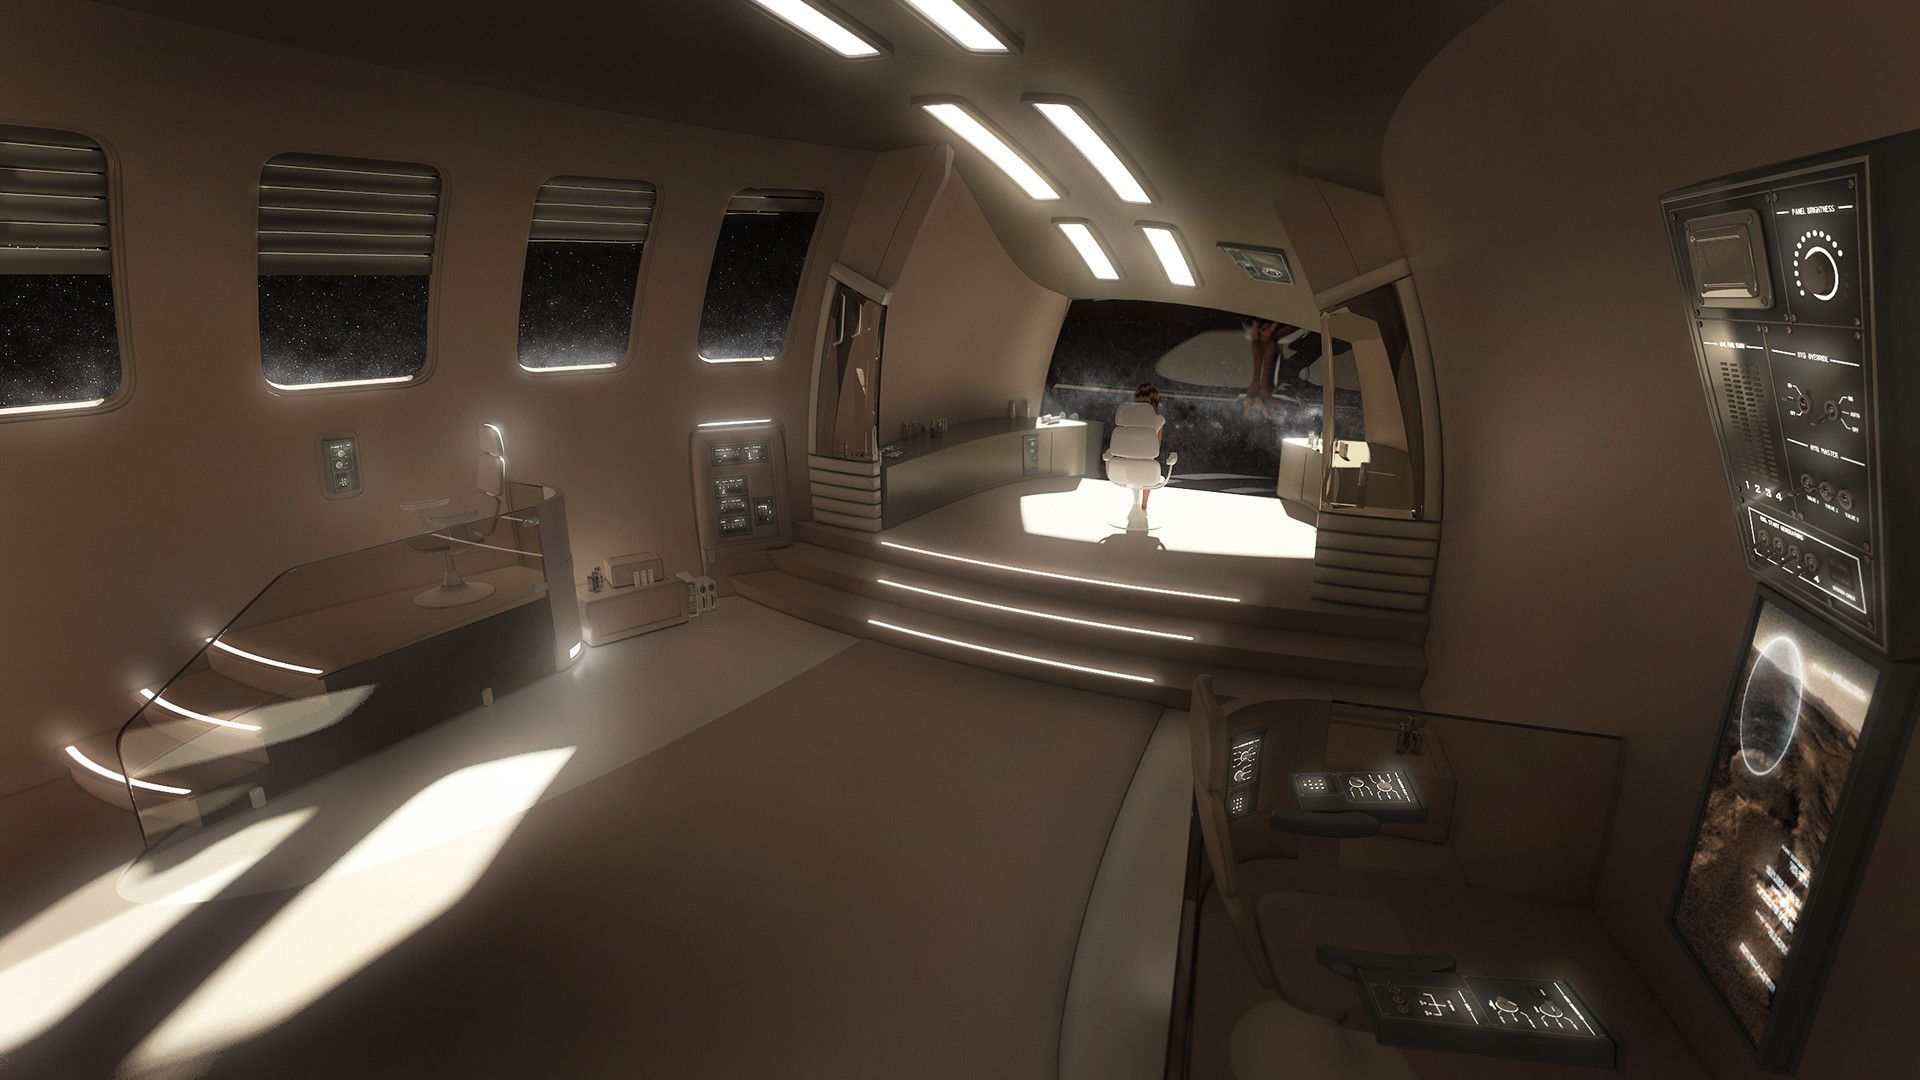 Inside Spaceship Wallpaper background picture